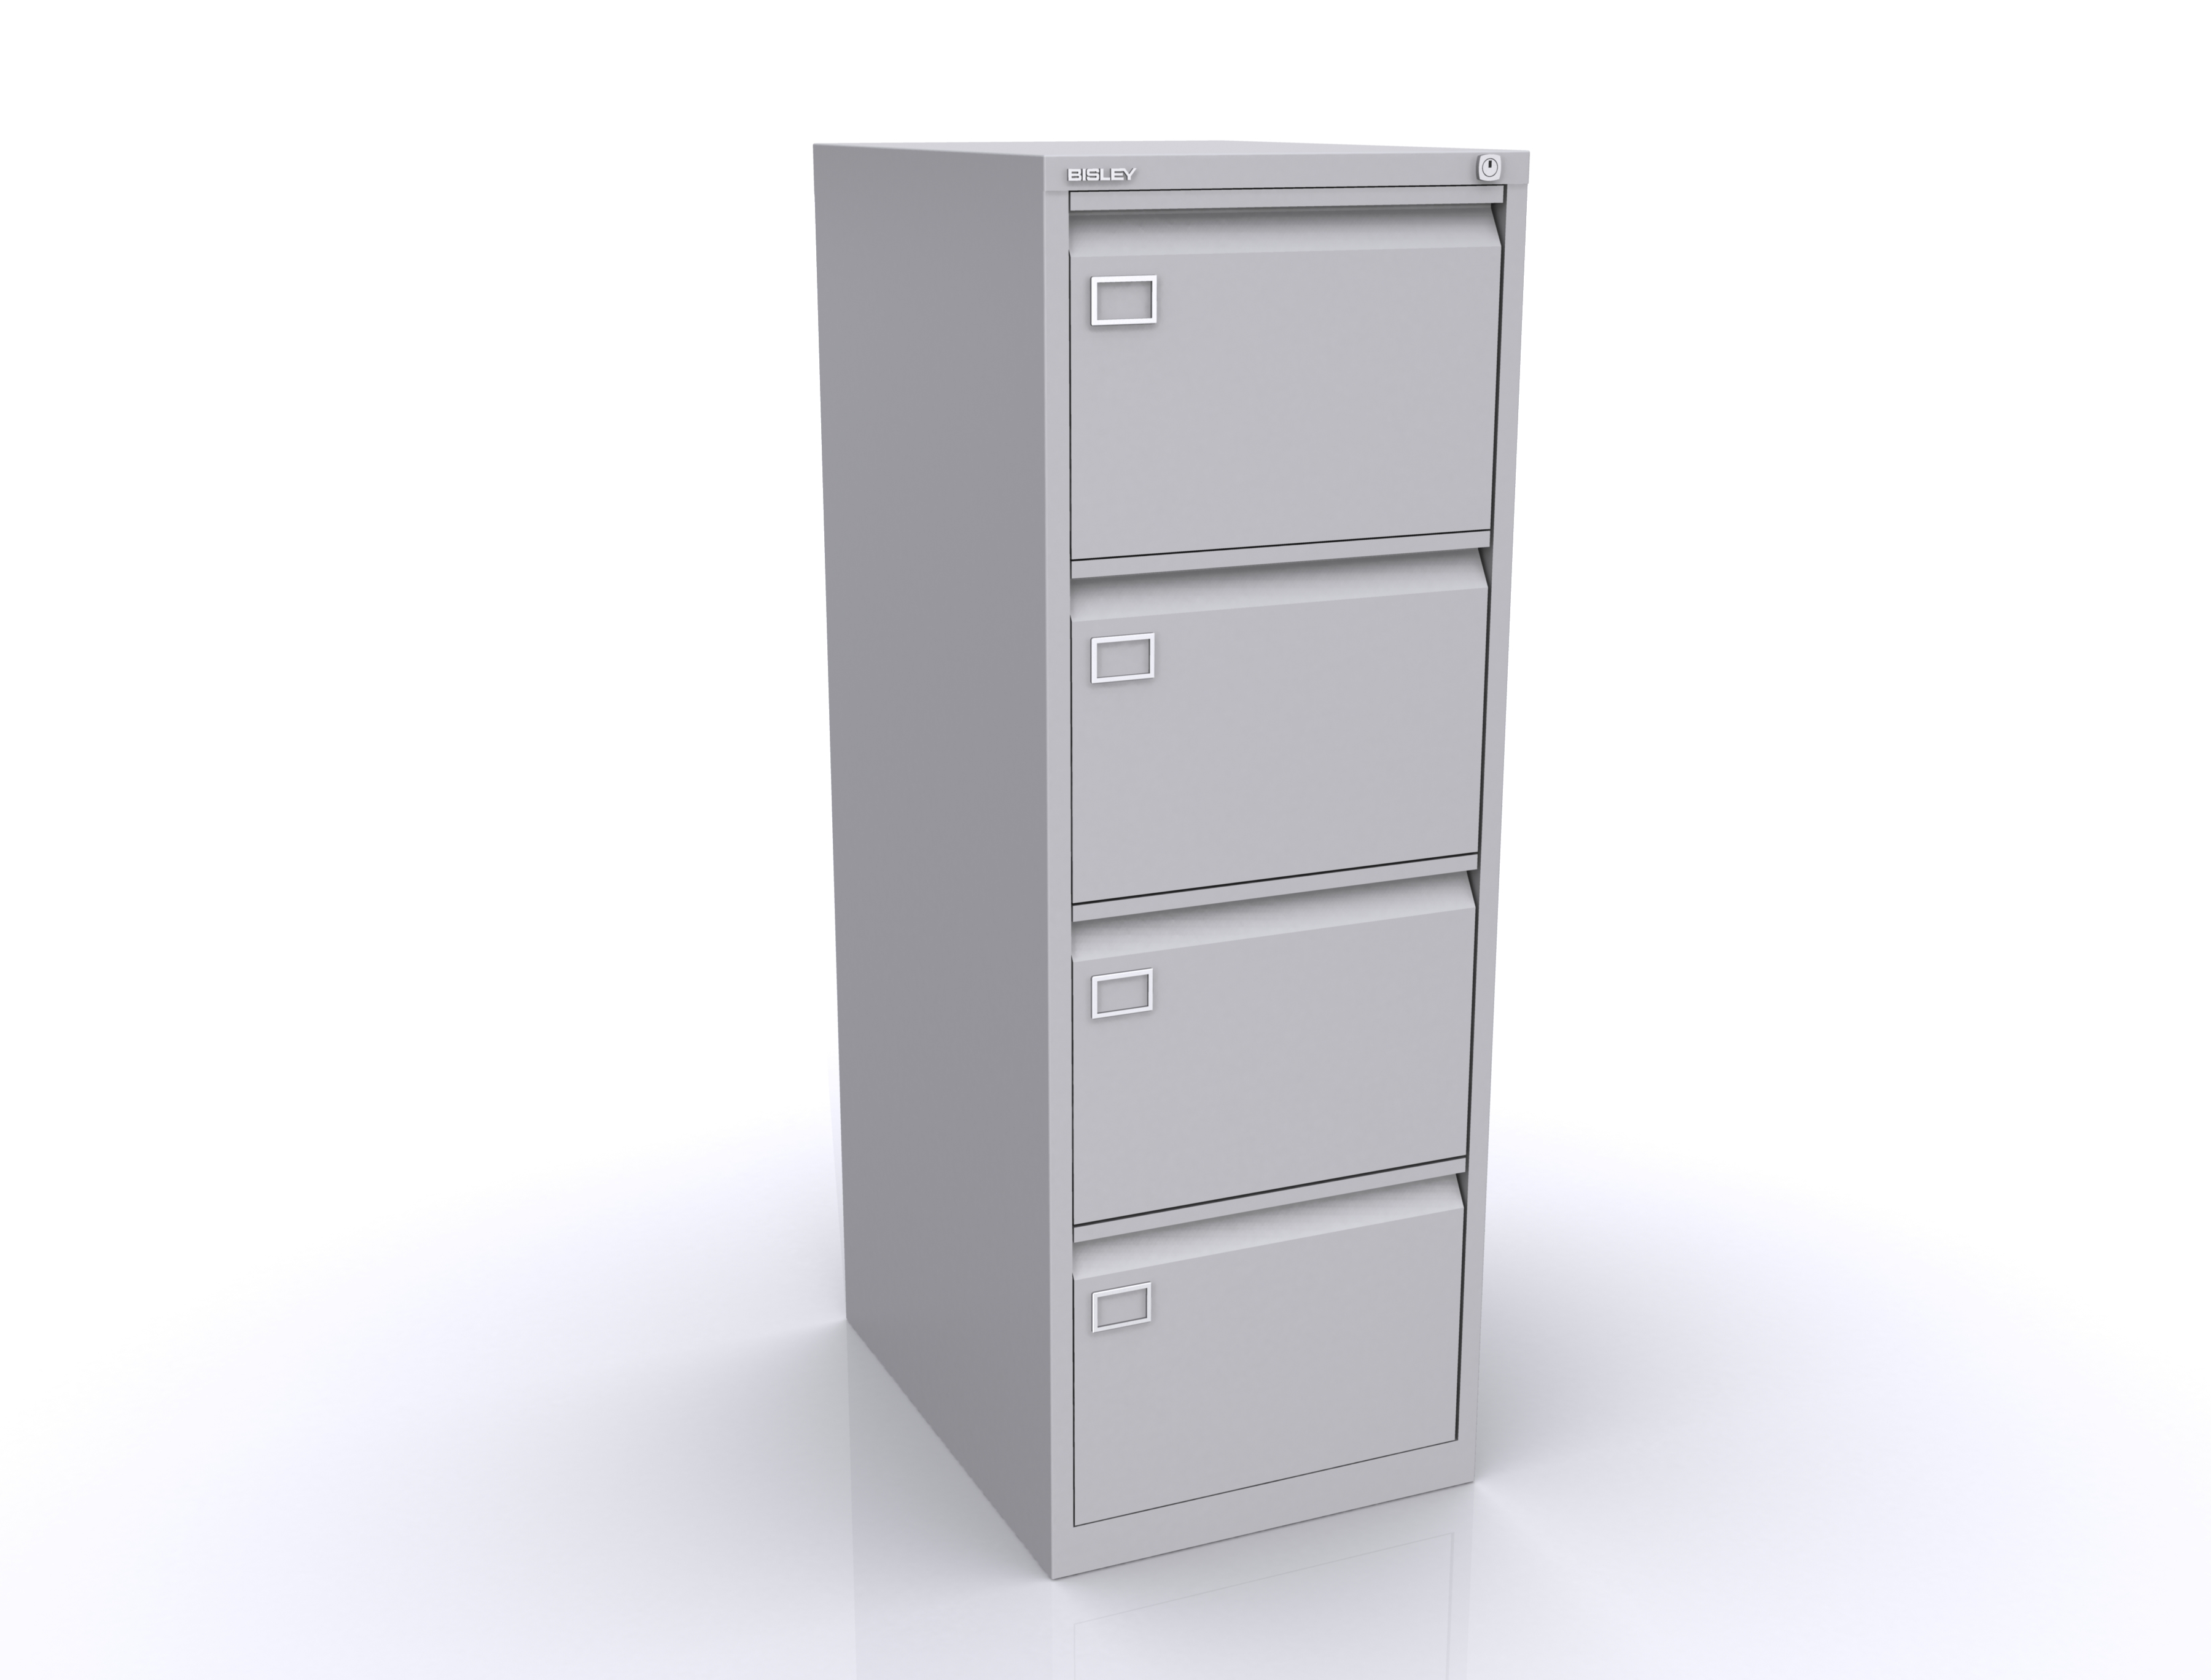 Storage Best Bisley File Cabinet For File Safety Idea for dimensions 3600 X 2736